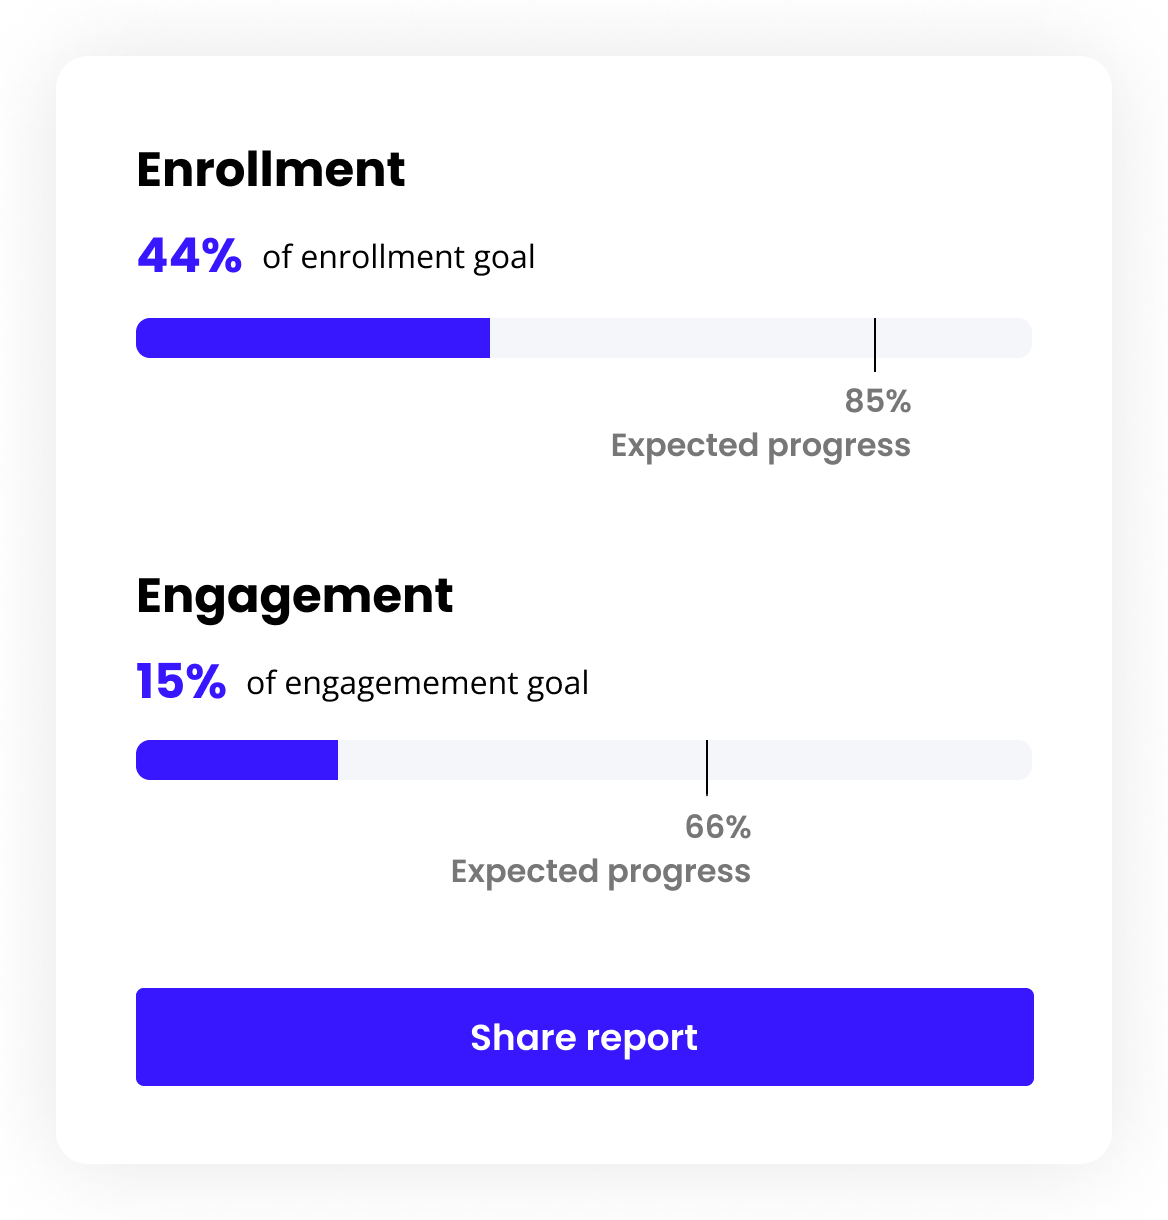 A panel with 2 progress bars for enrollment and engagement goals